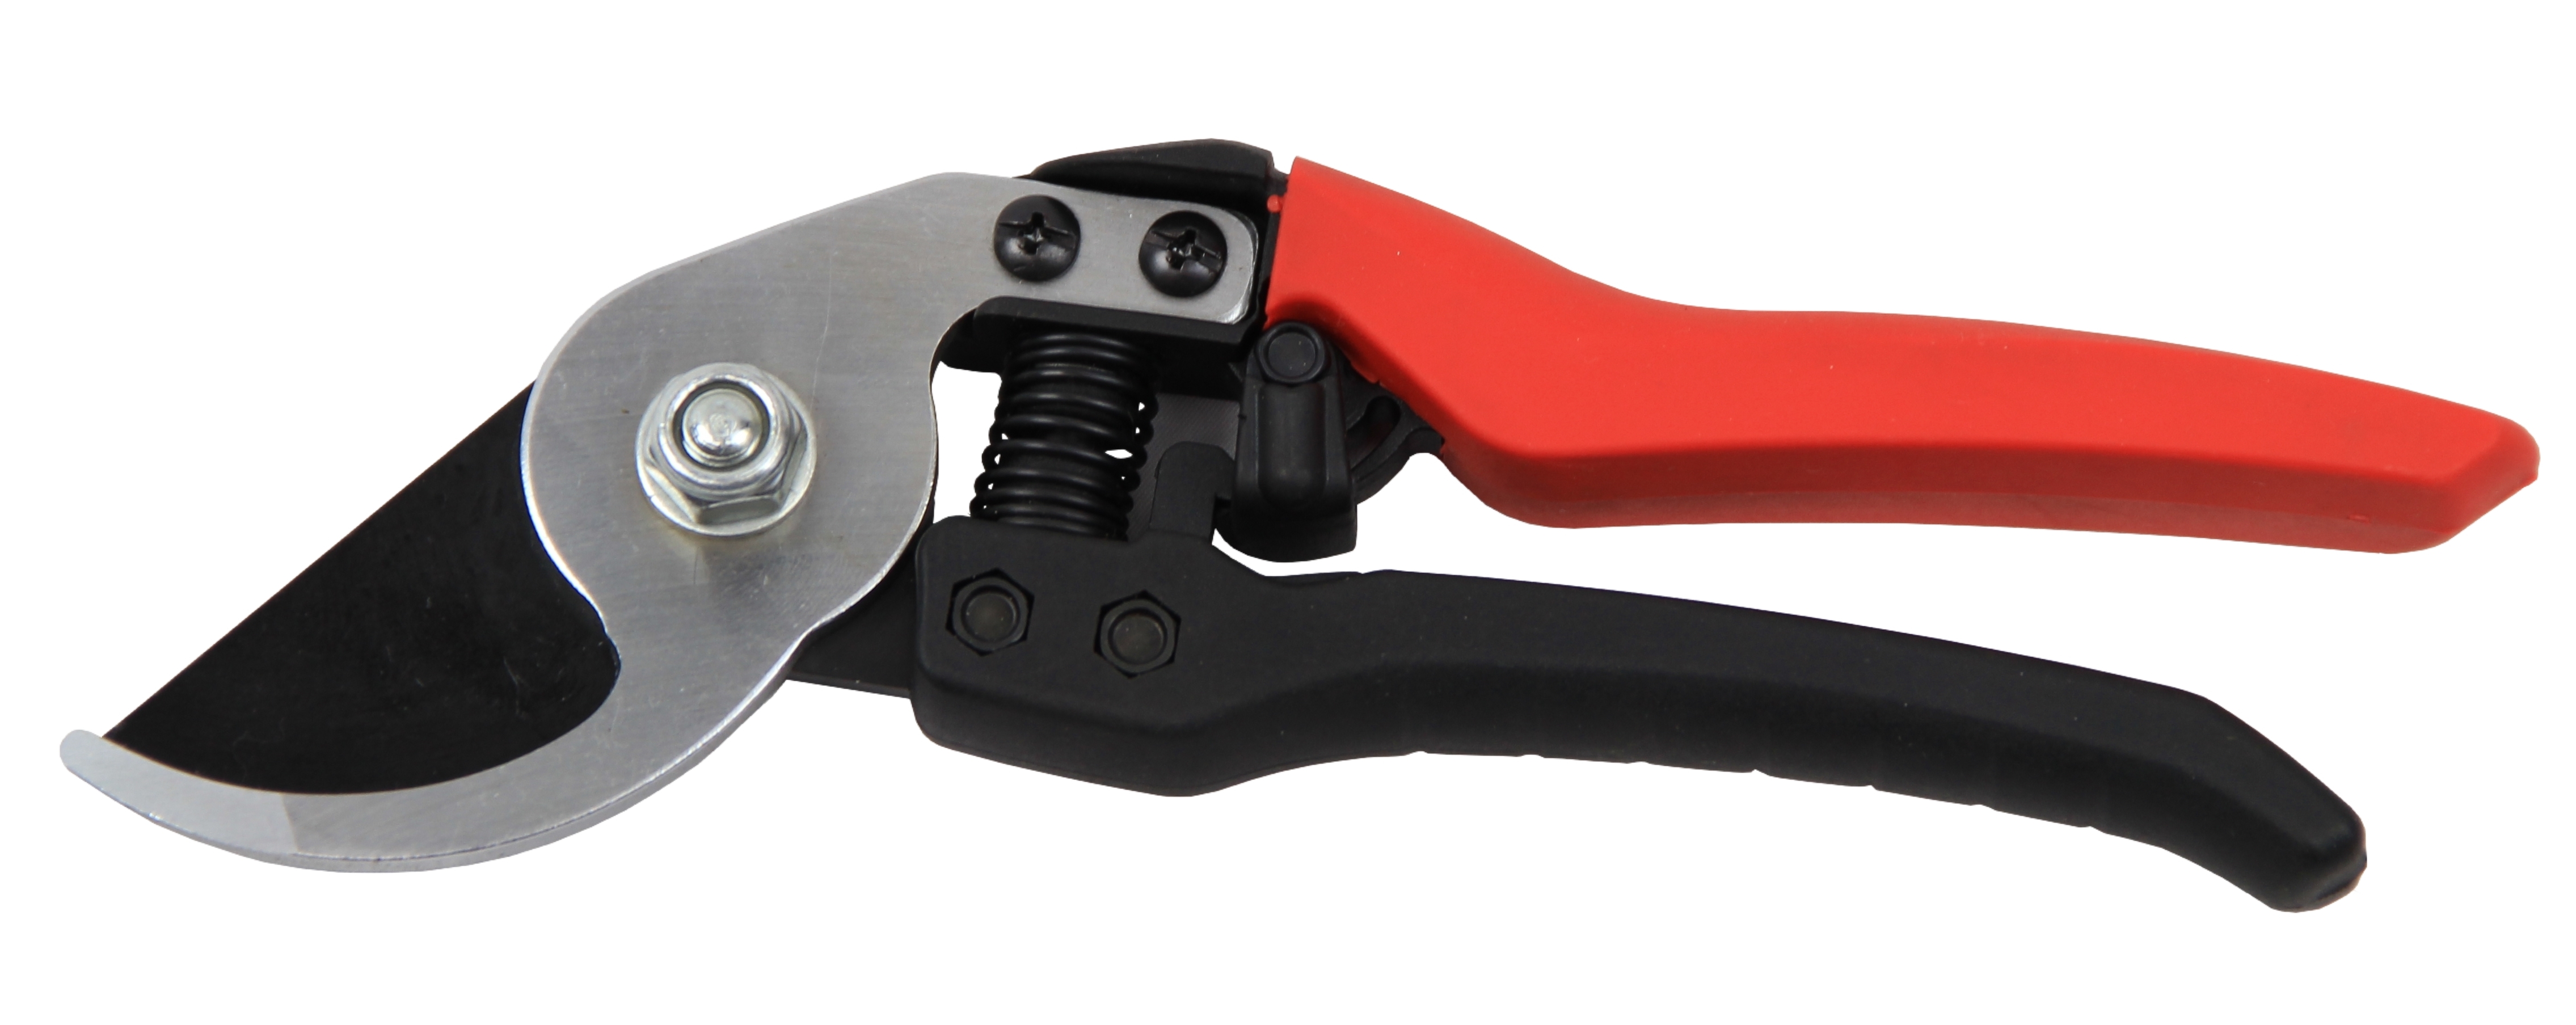 8” Forged Bypass Pruner (Pruners)